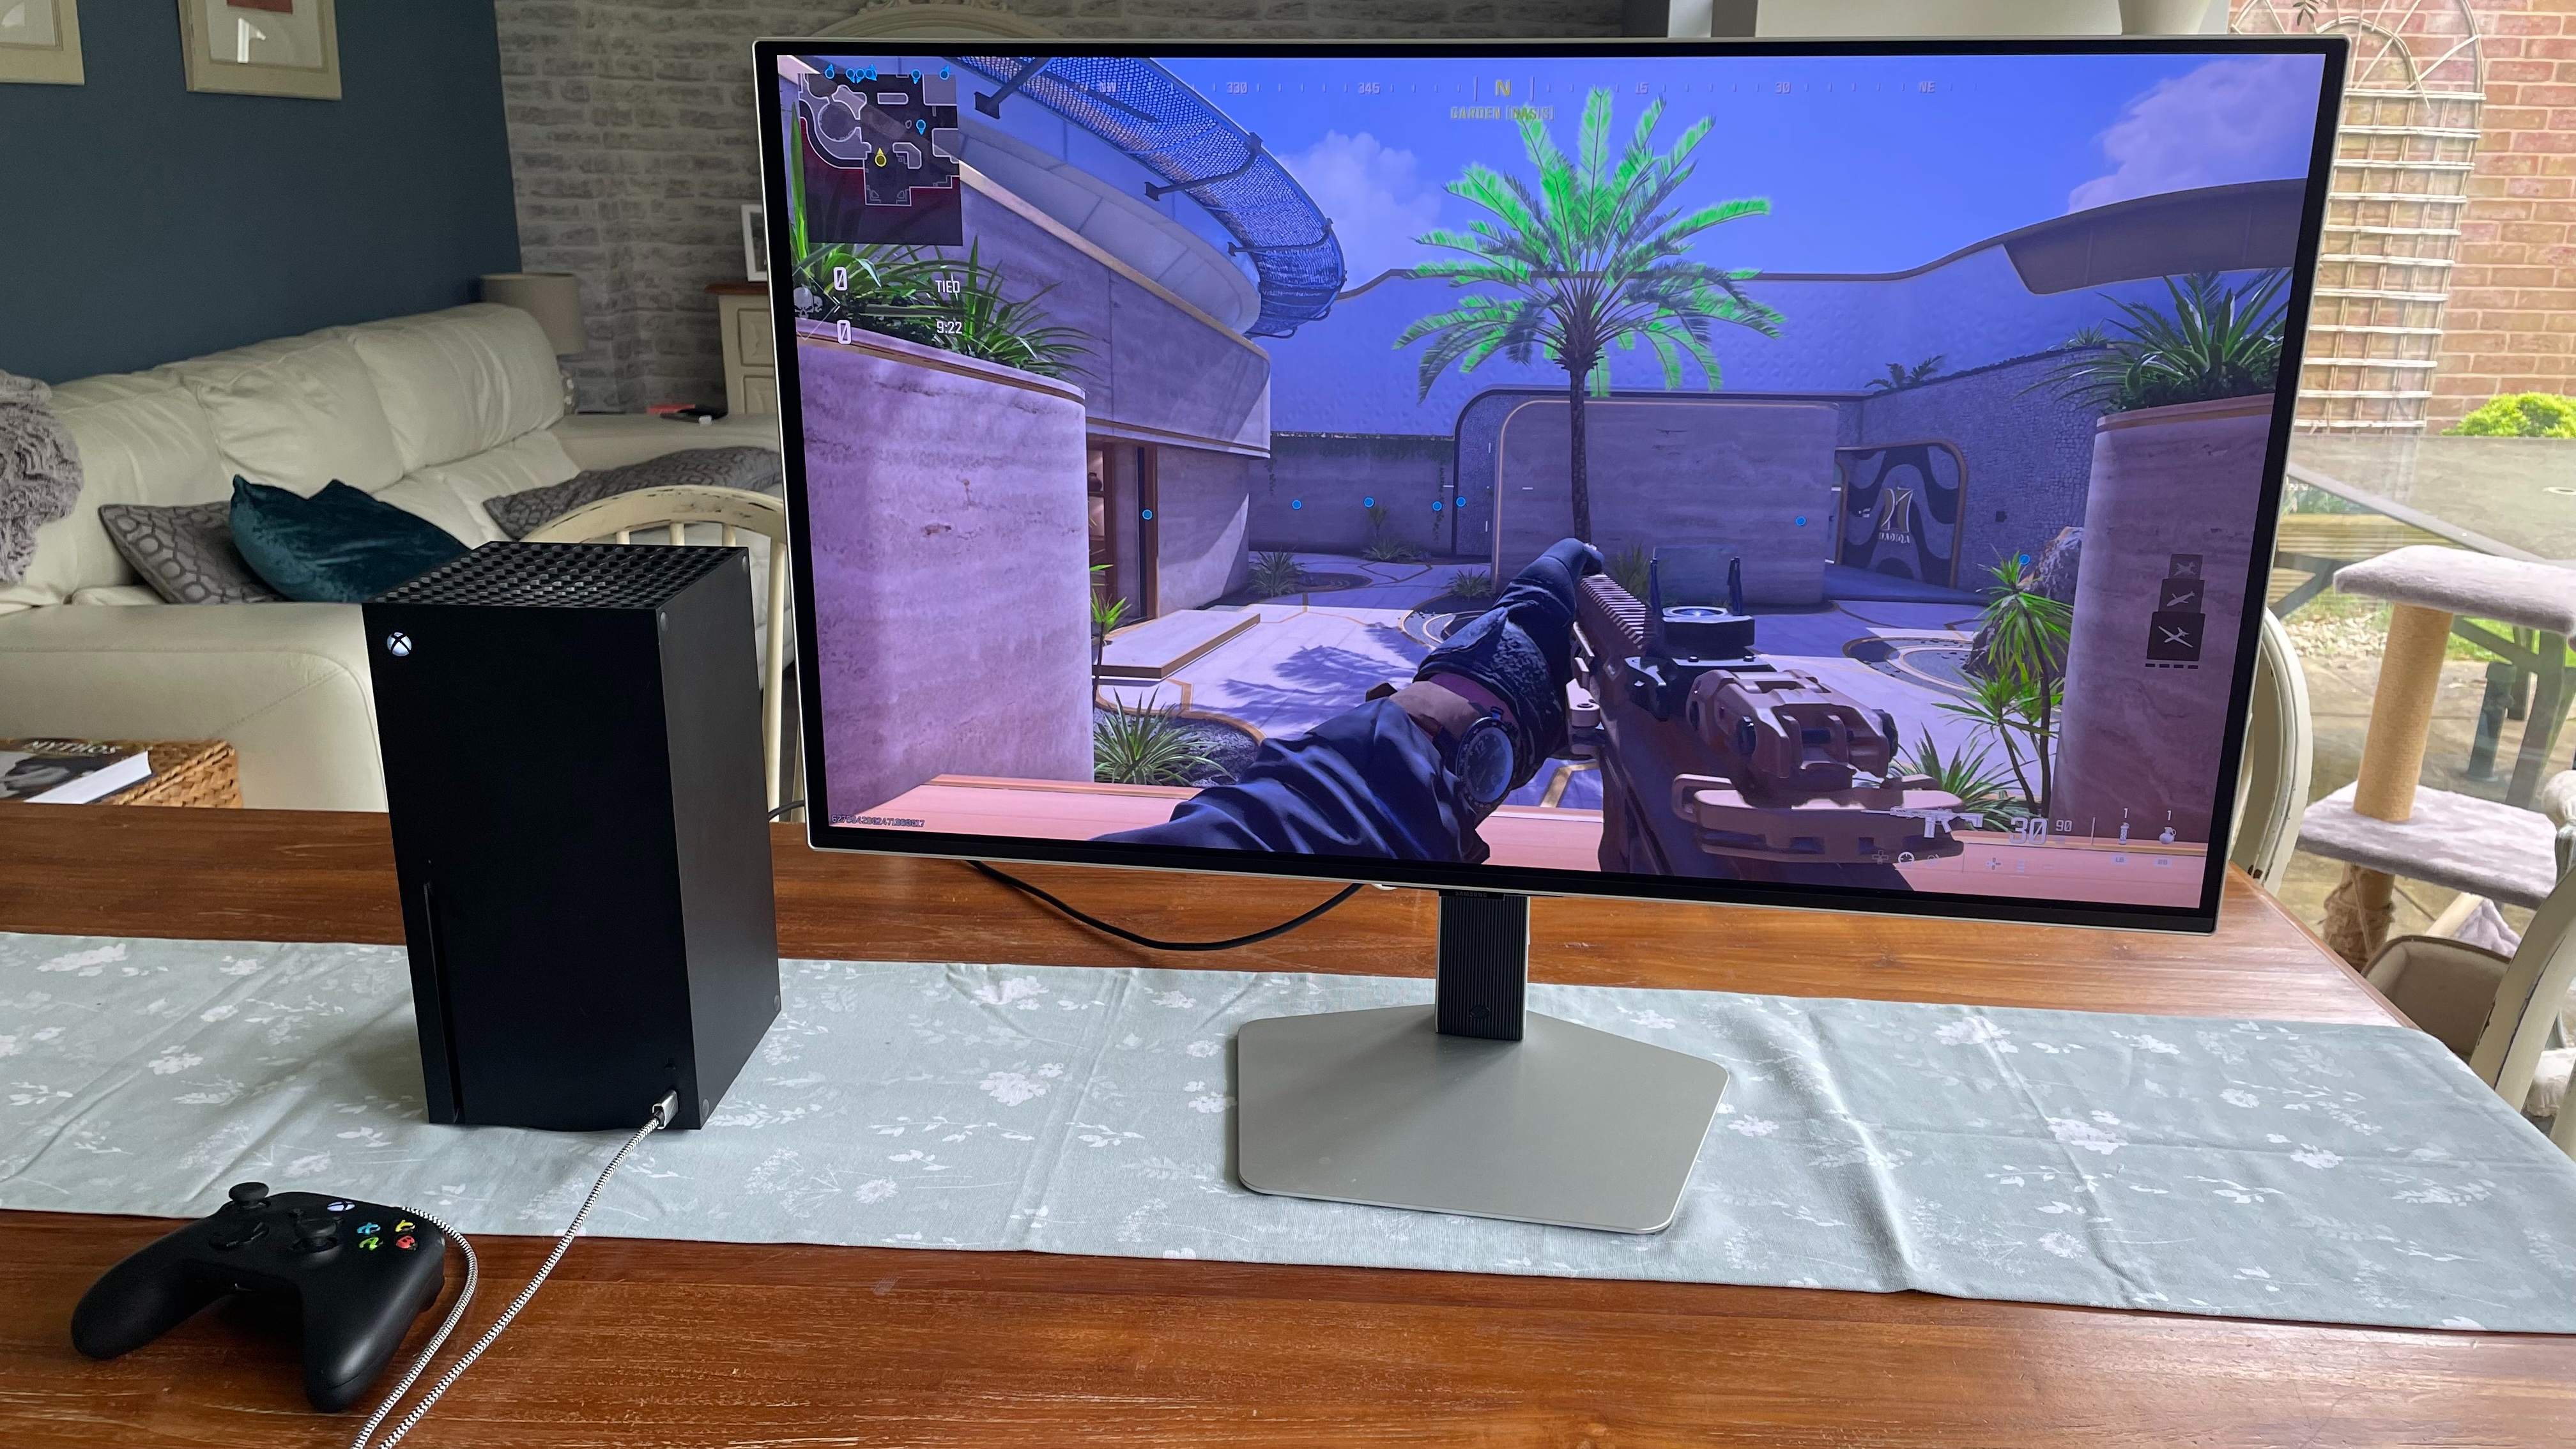 The Samsung Odyssey S32G80SD gaming monitor on a table with an Xbox Series X